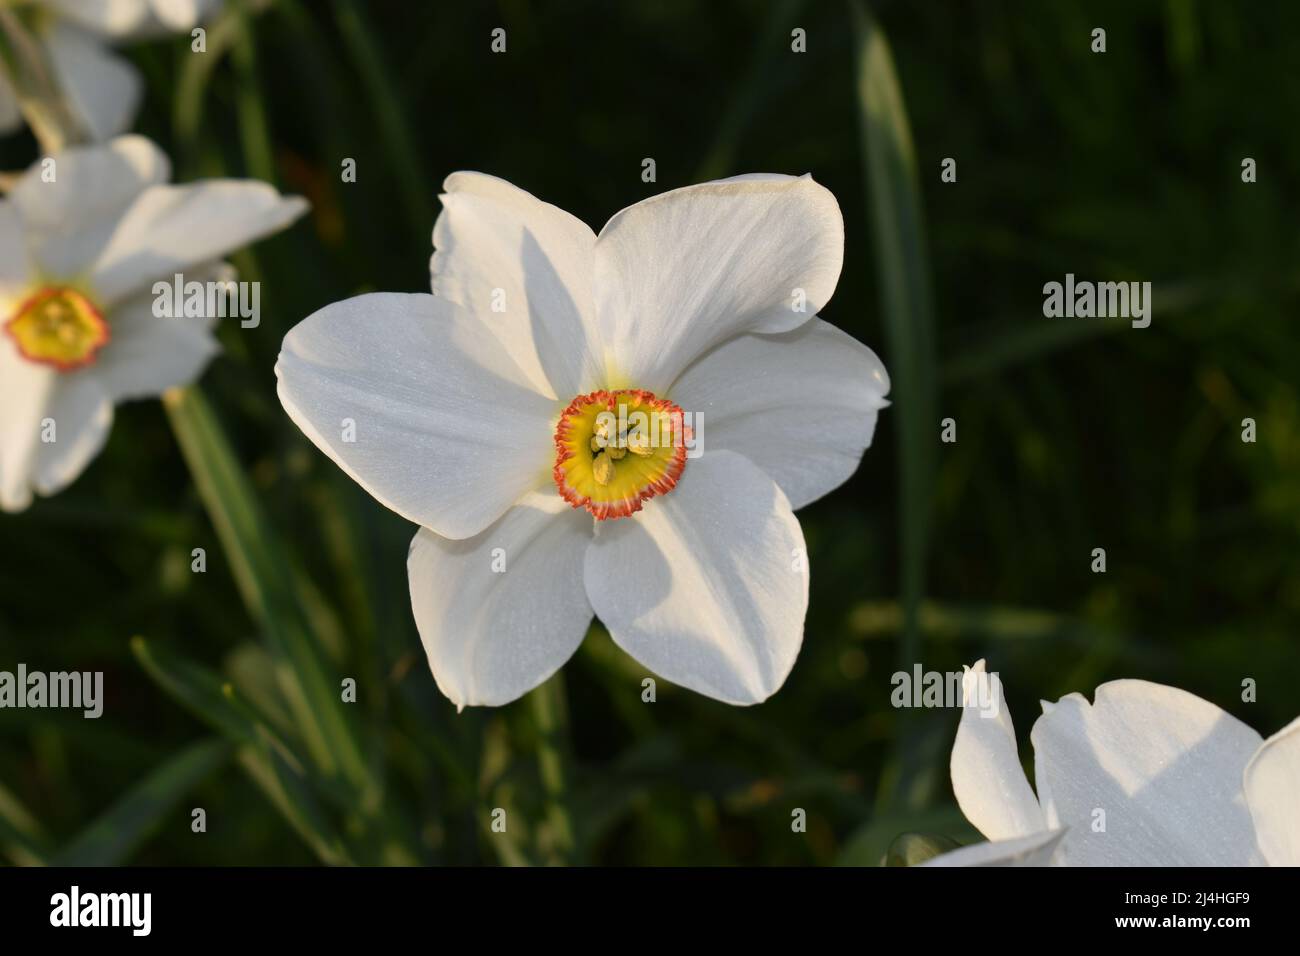 A close up of a white daffodil with an orange and yellow centre (Narcissus poeticus). Stock Photo